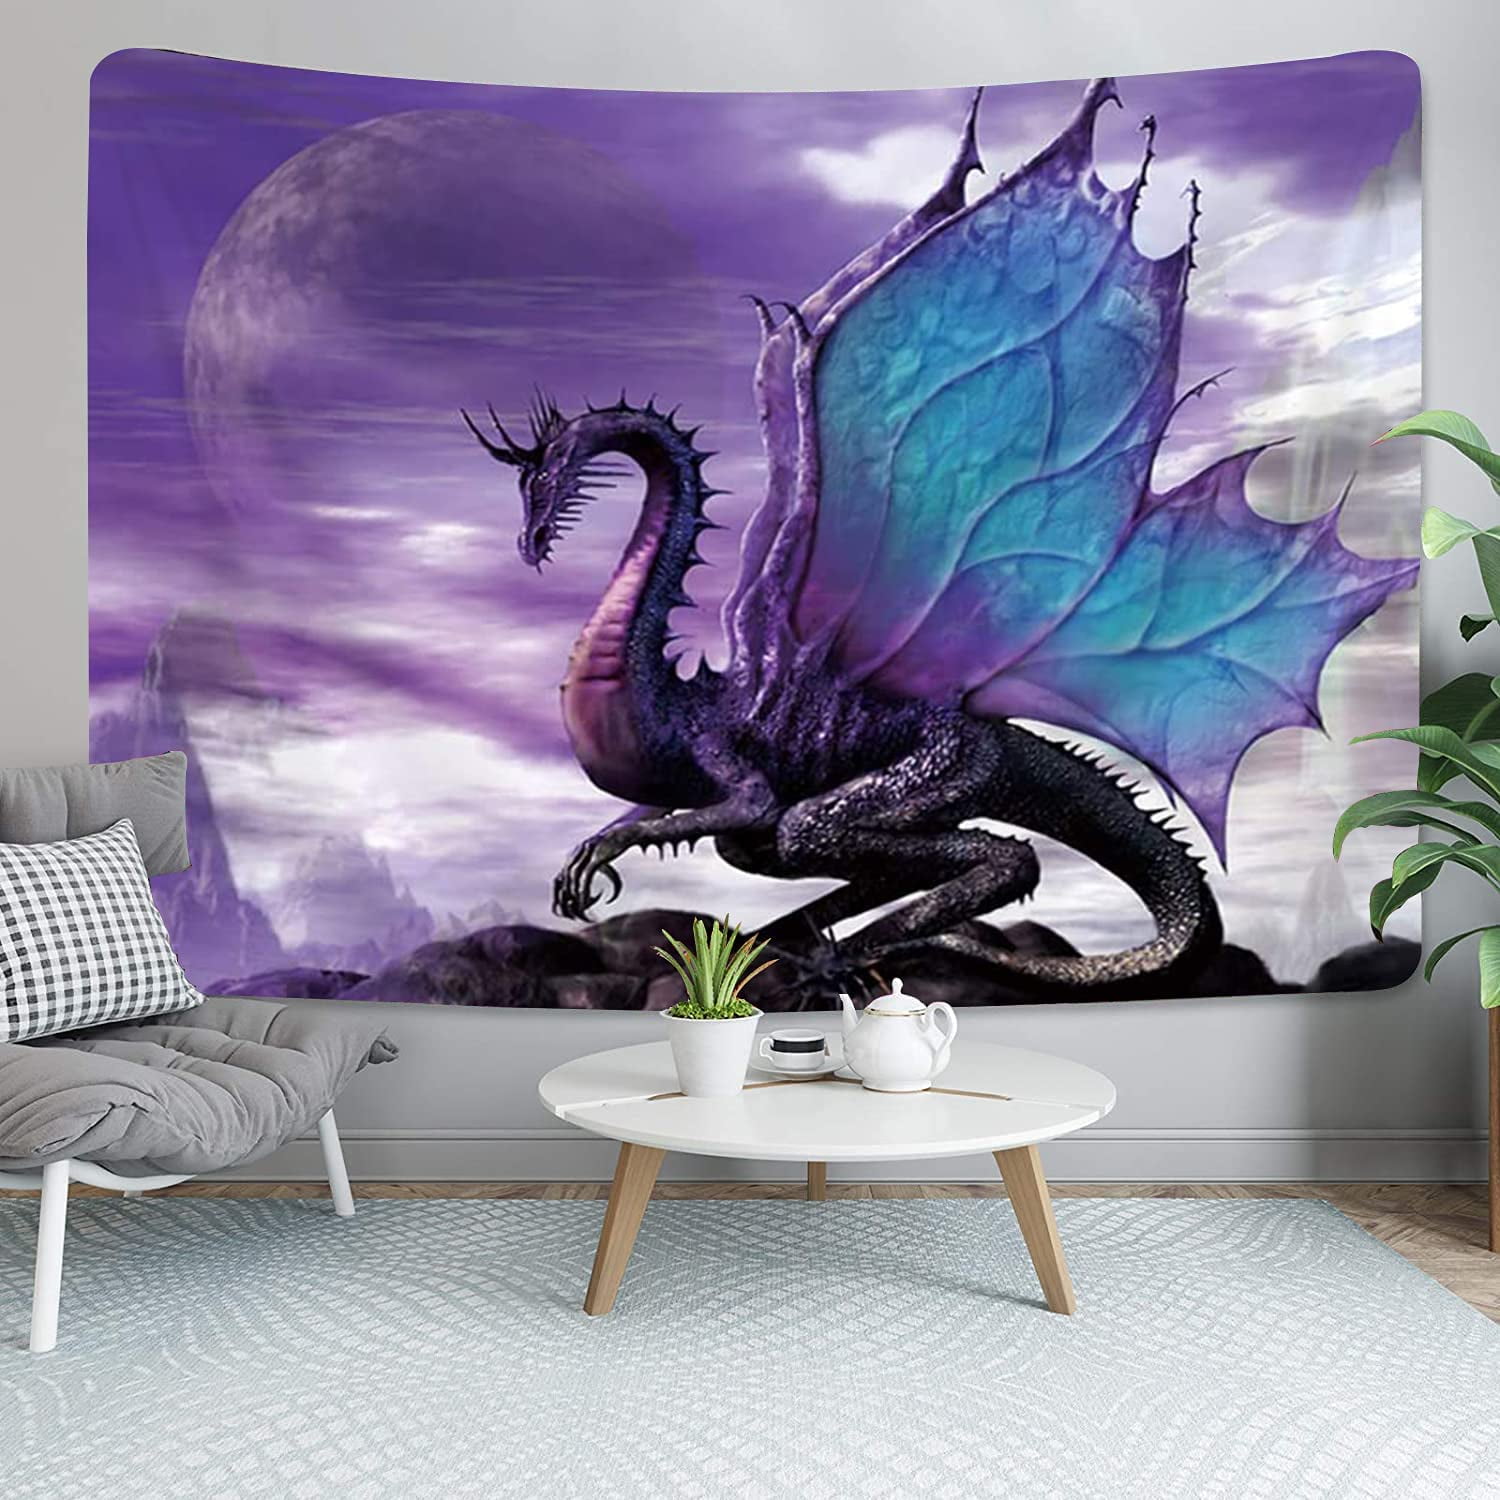 Medieval Fantasy Animals Tapestries Home Decor Psychedelic Tapestry Living Room Bedroom Dorm 60X40 Inches MERCHR Purple Dragon Tapestry Wall Hanging 